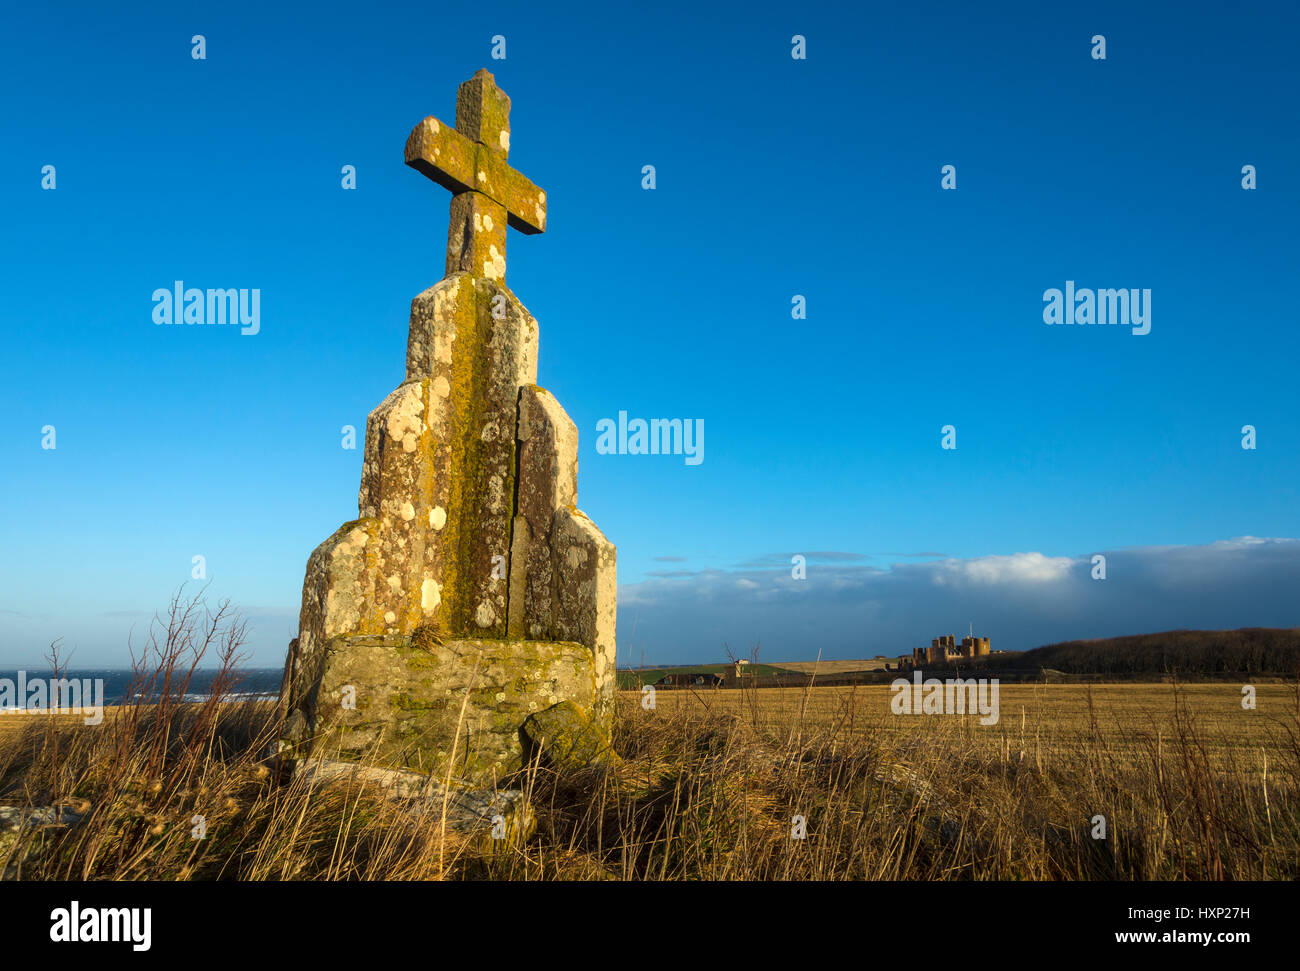 Stone cross on the Cairn of Mey, near the village of Mey, Caithness, Scotland, UK. Castle of Mey in the distance. Stock Photo